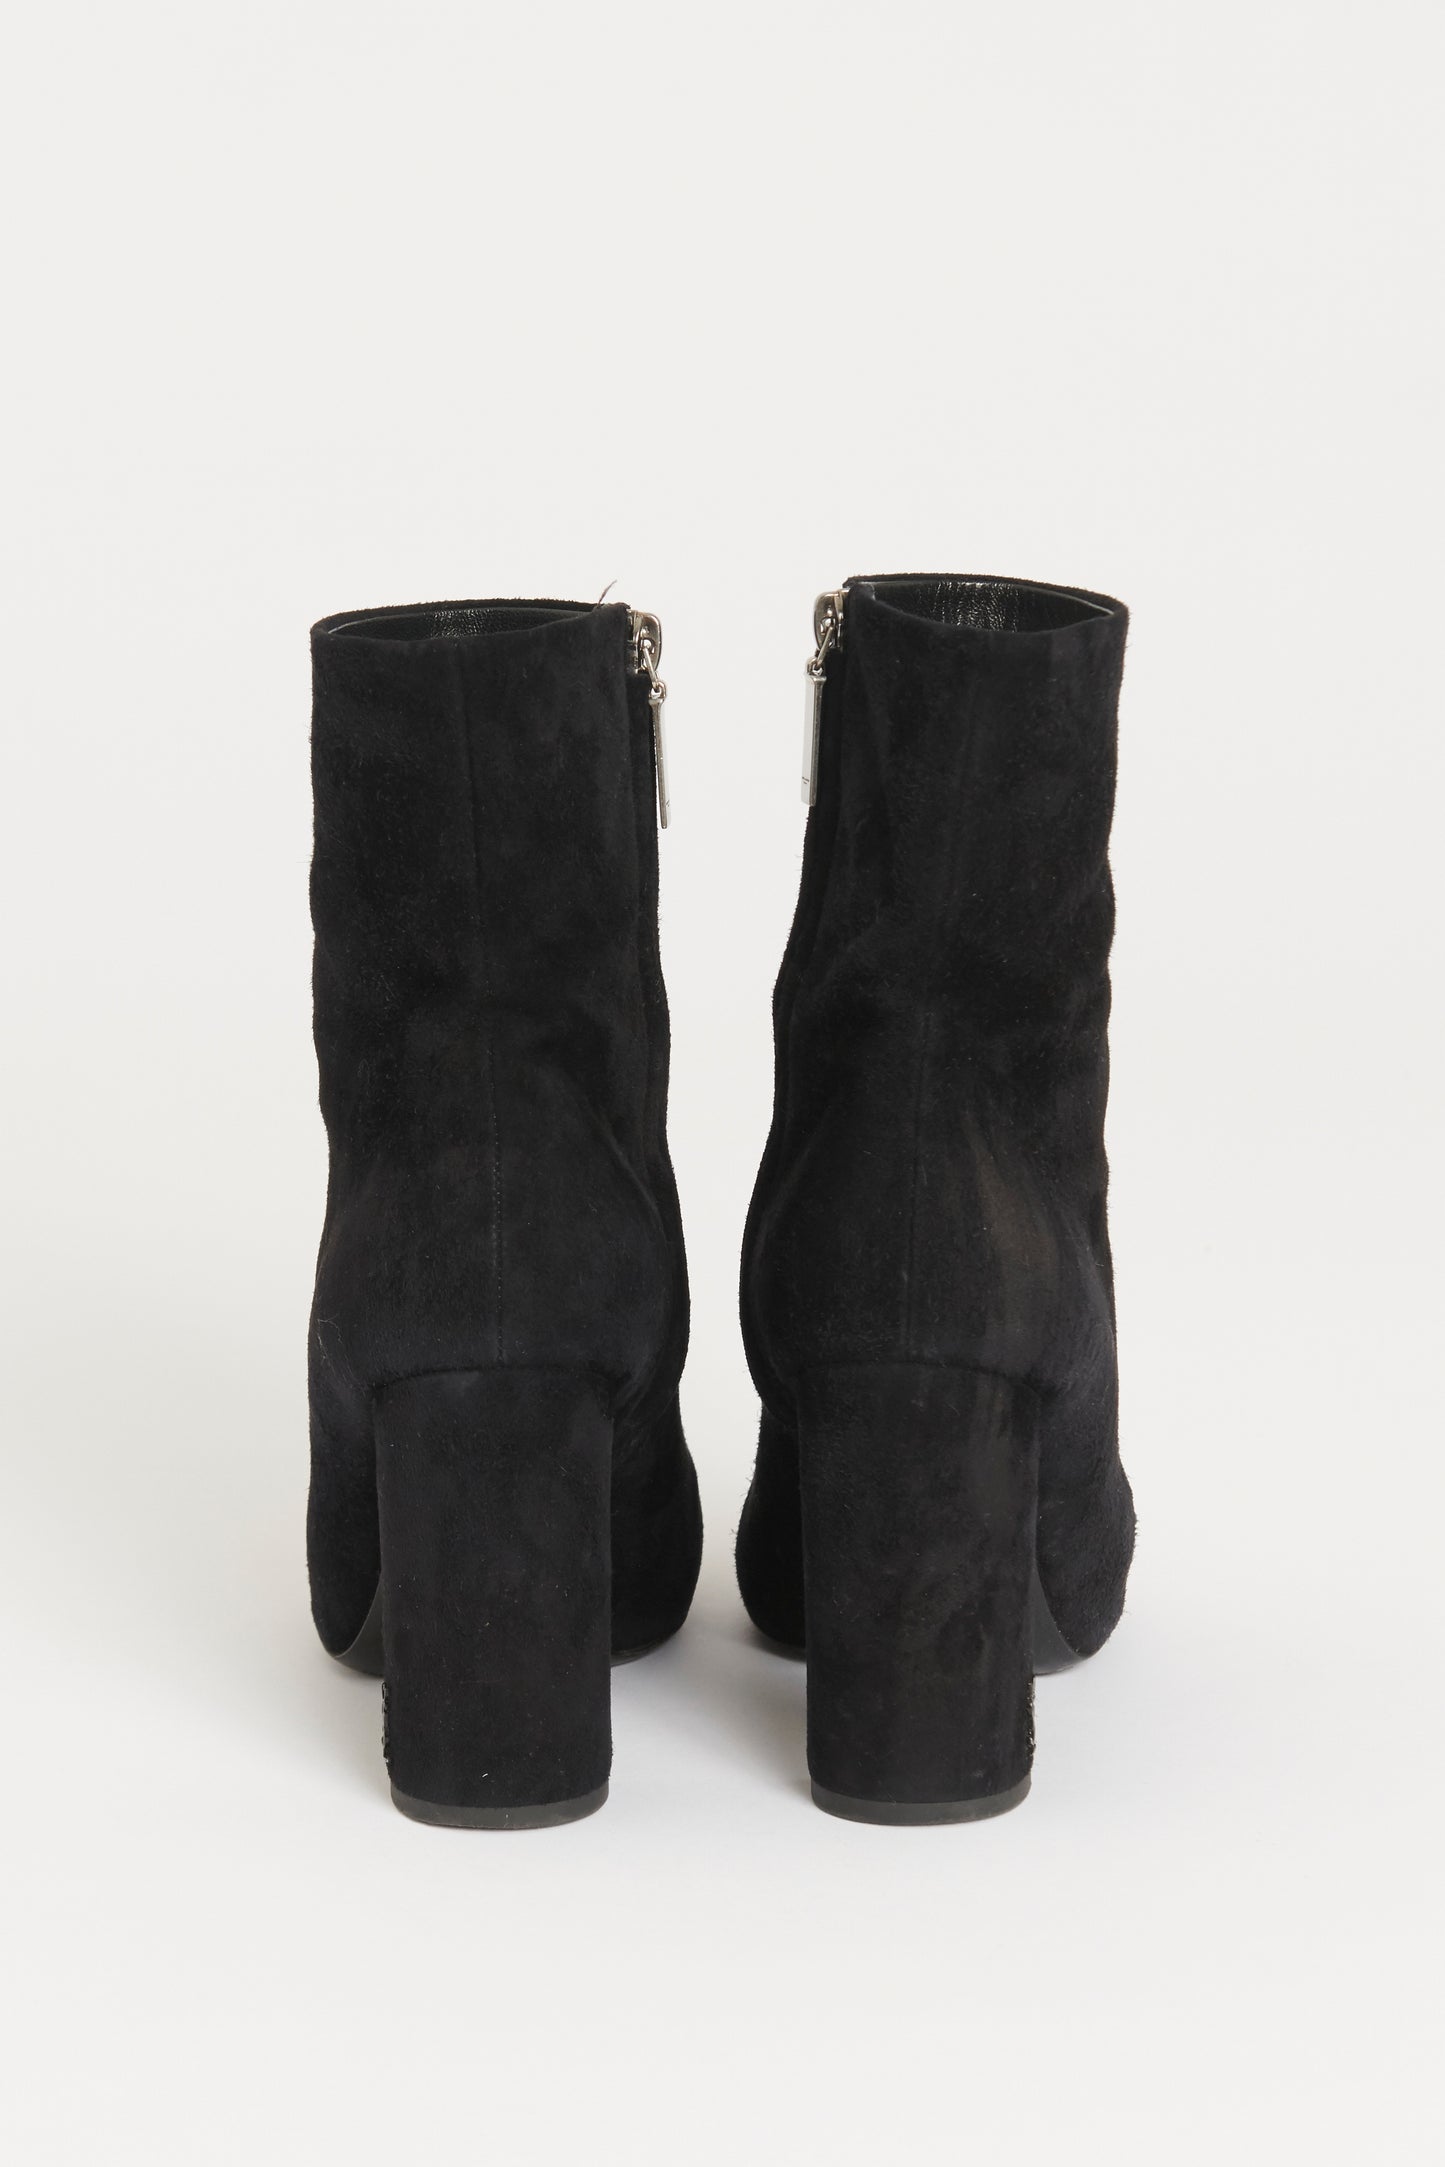 Black Suede Lou Preowned Ankle Boots